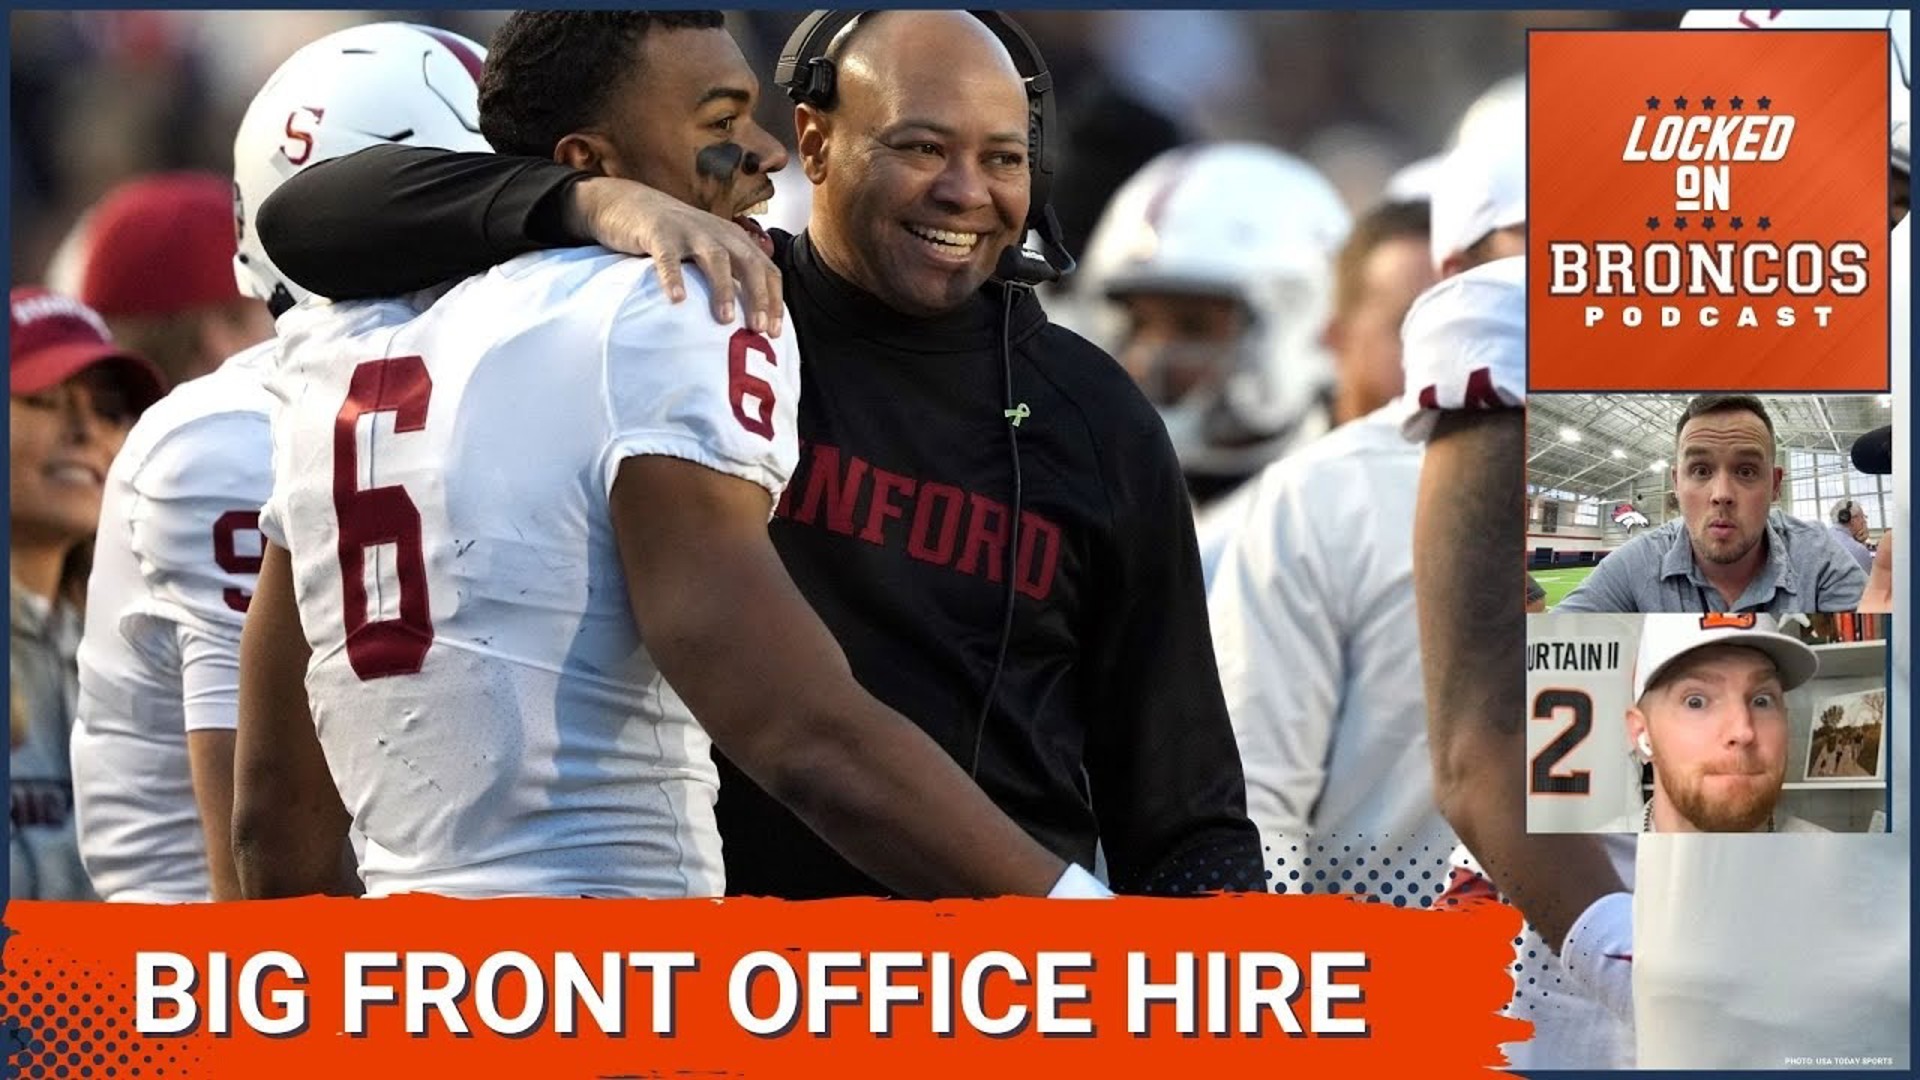 The Denver Broncos made a massive move on Thursday, hiring former Stanford football head coach David Shaw to a front-office role.